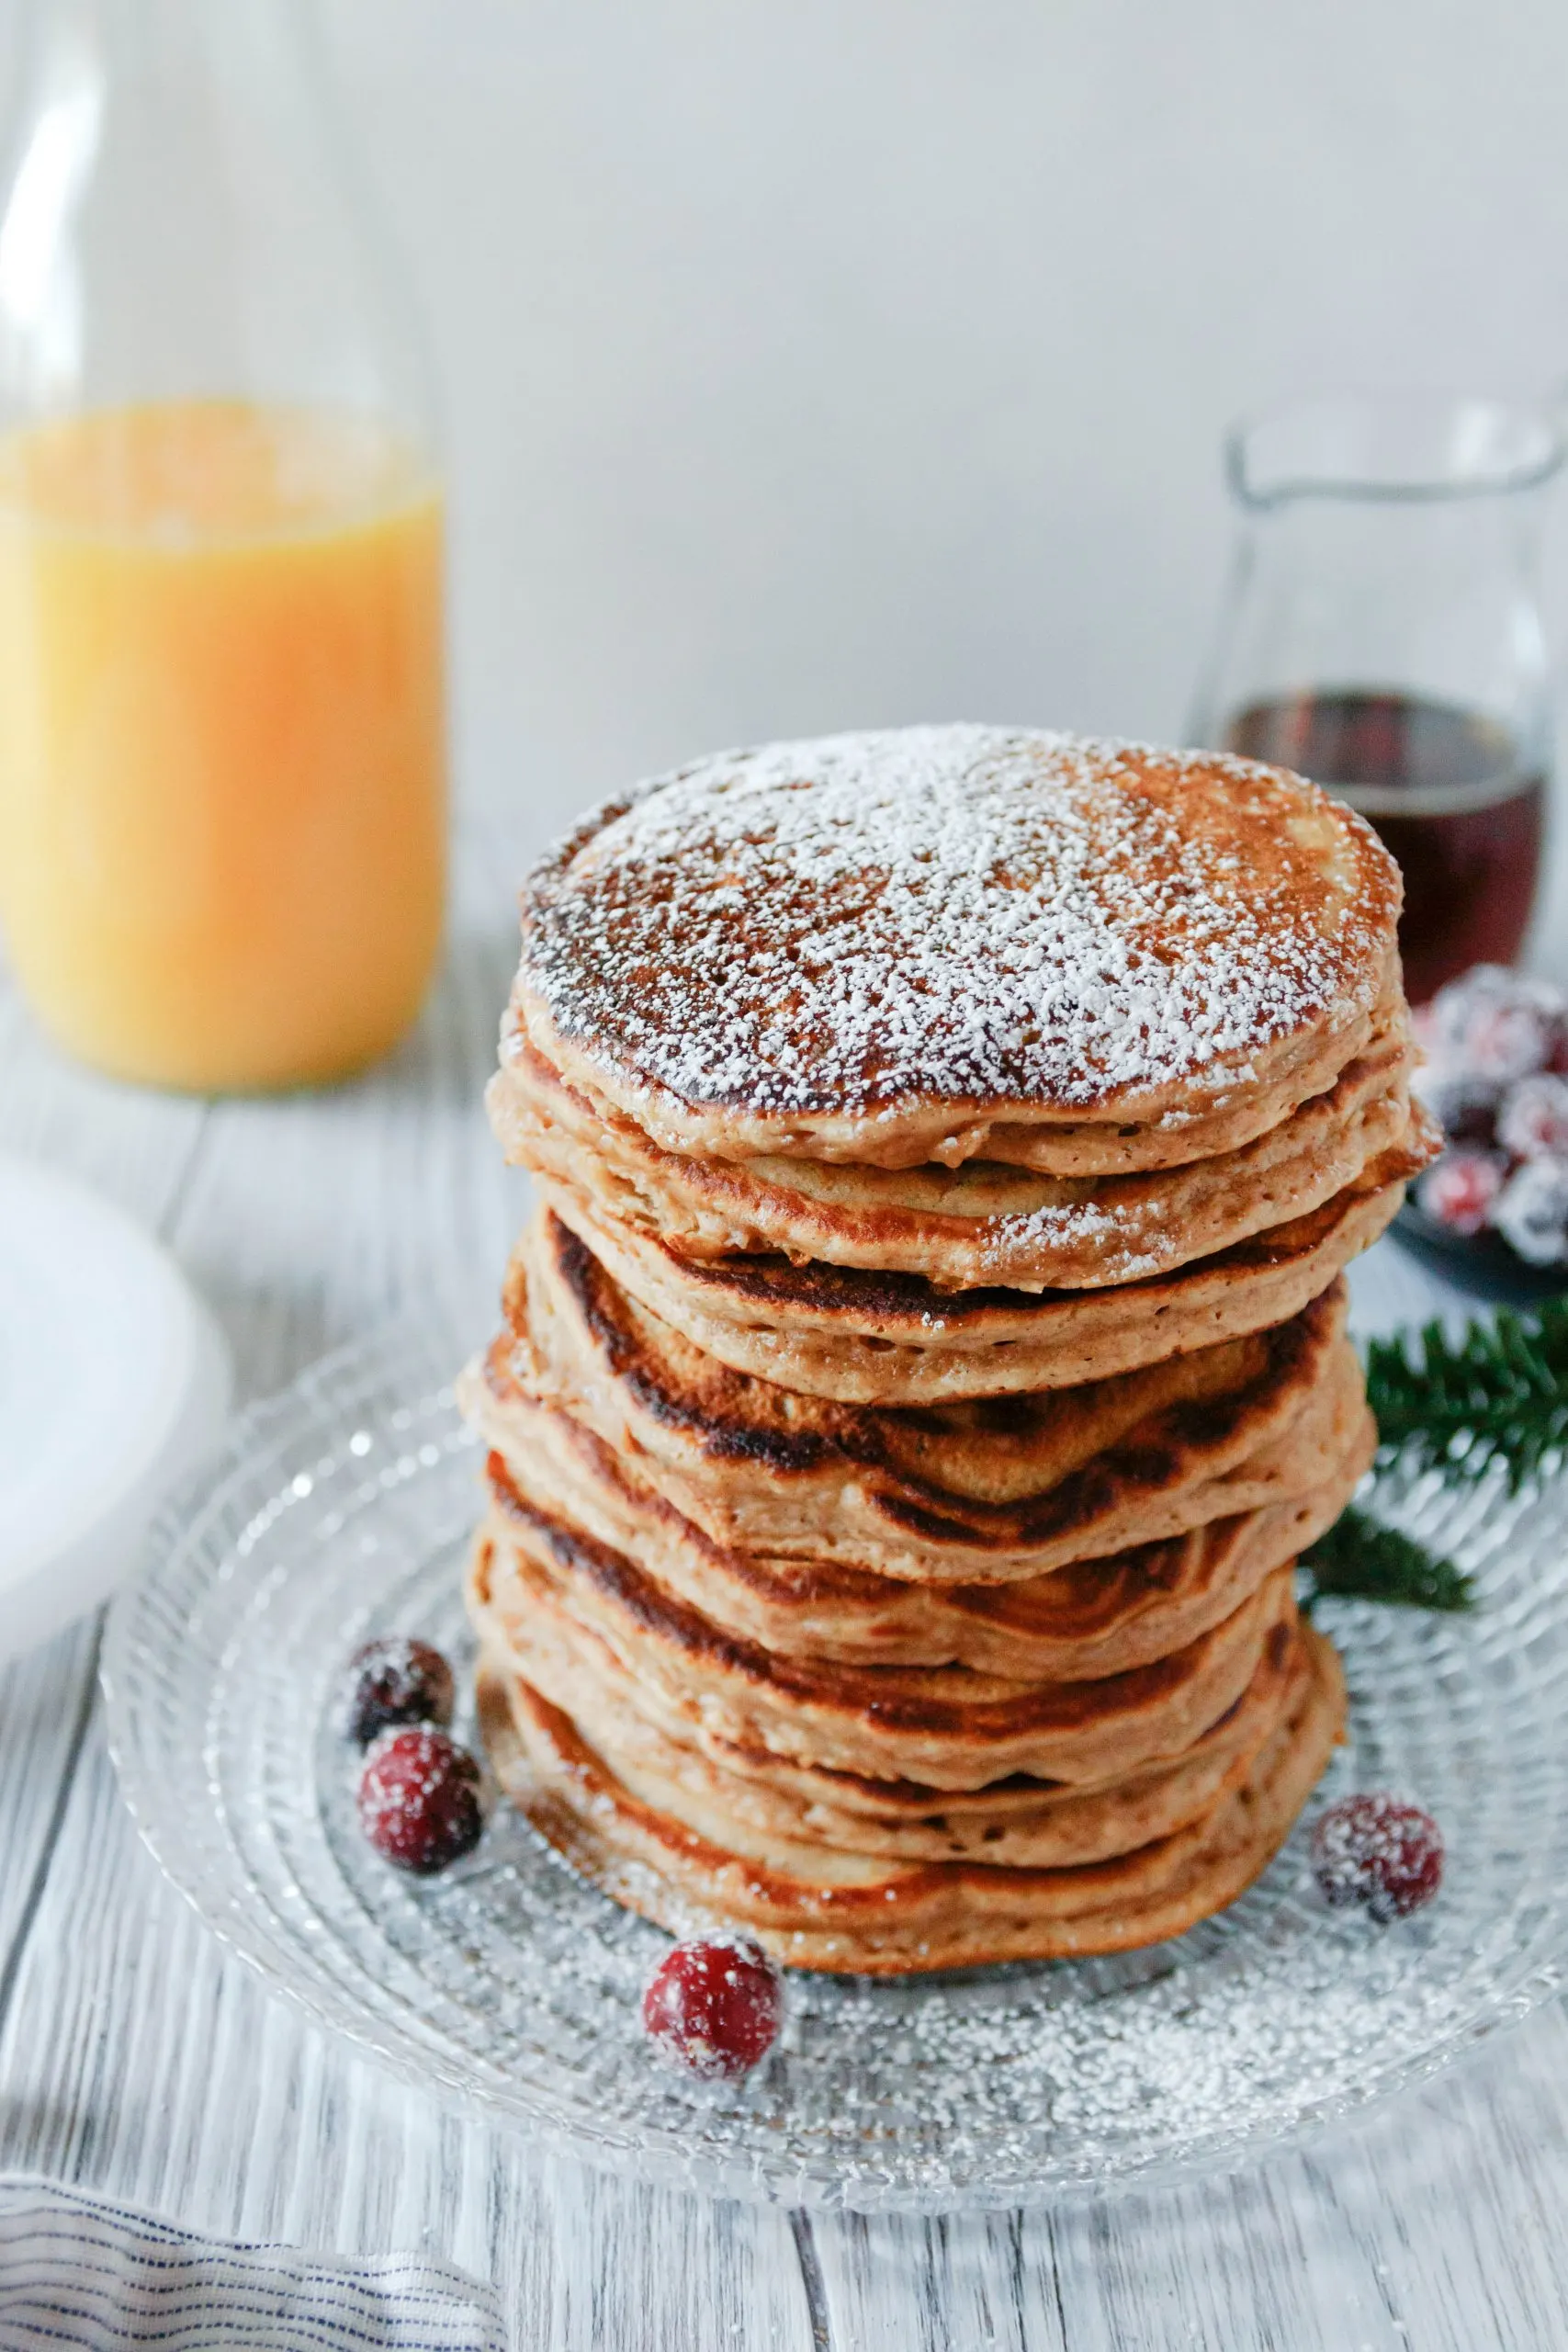 angled picture of a big stack of pancakes dusted with powdered sugar. Pancakes are on a glass plate and garnished with a few sugared cranberries.